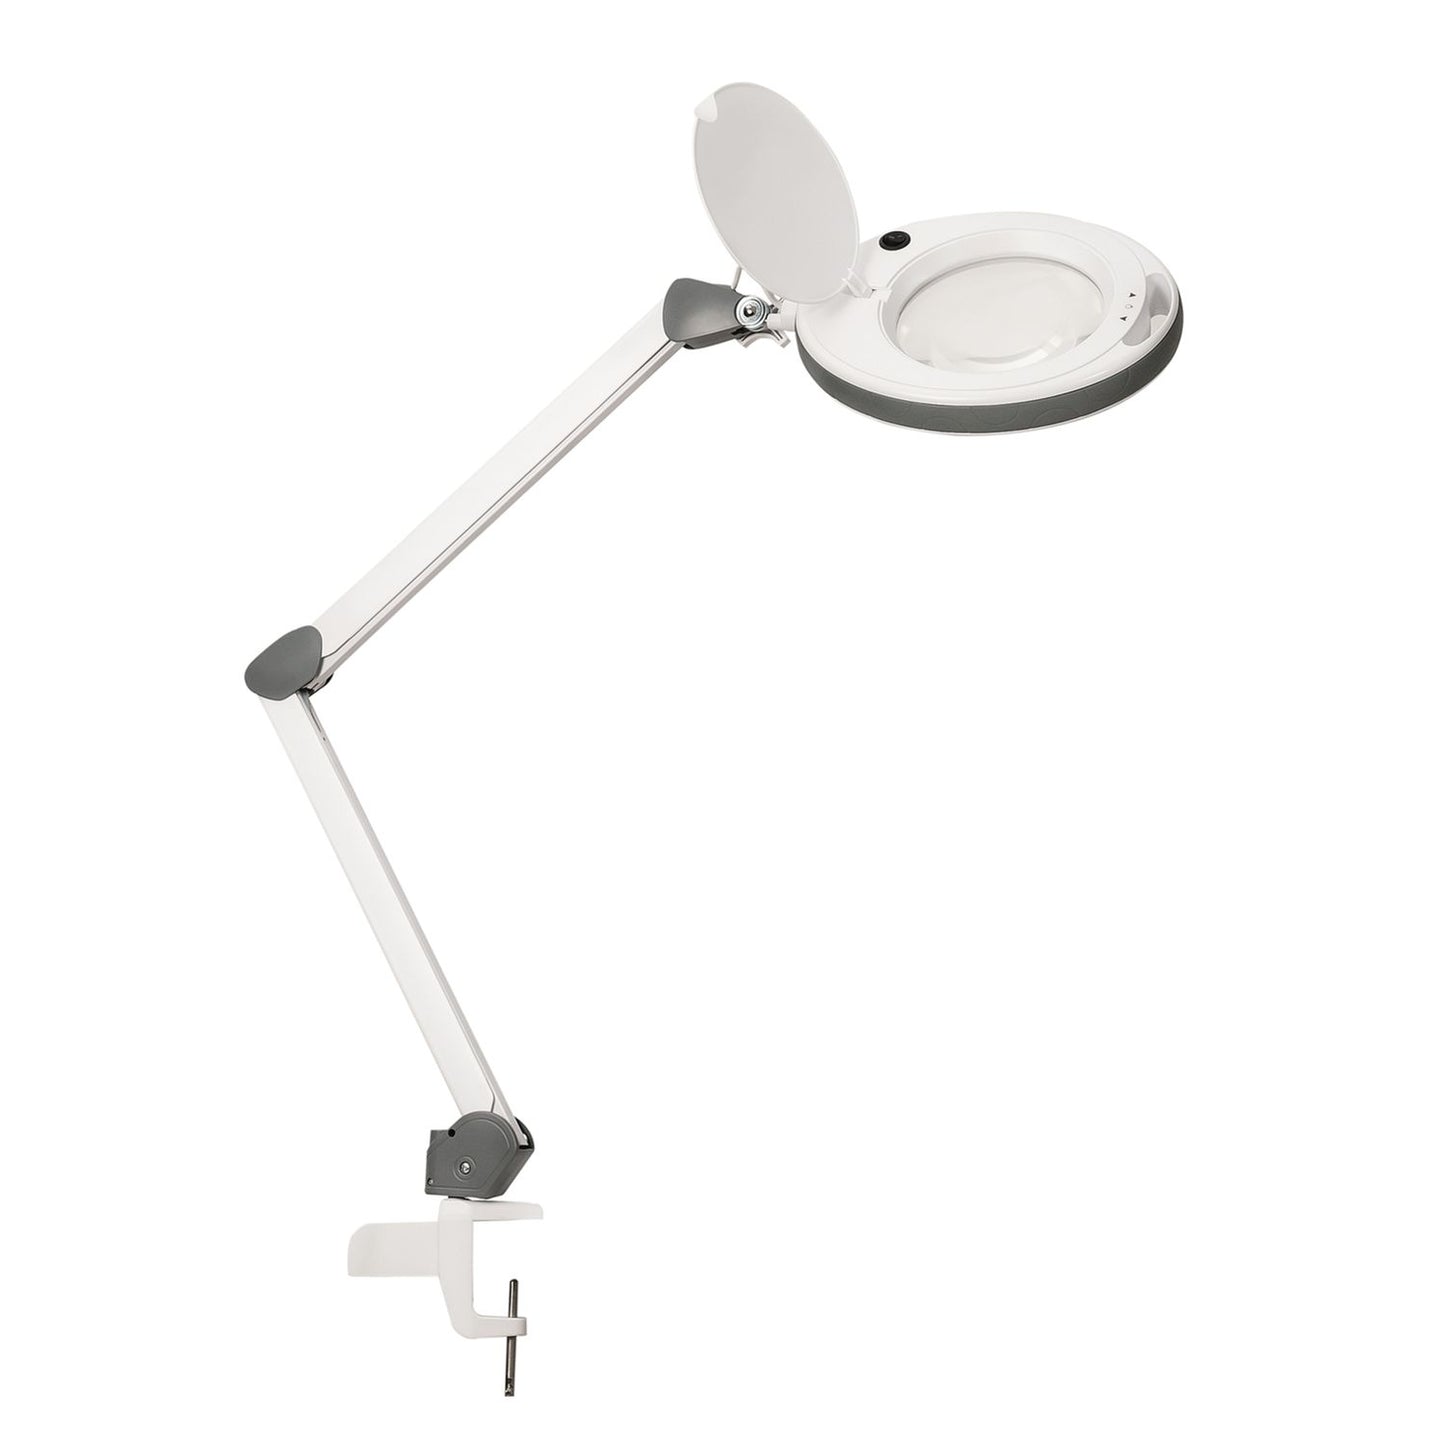 Lumeno LED magnifying lamp 851X series, with 152mm real glass lens, dimmable, grey